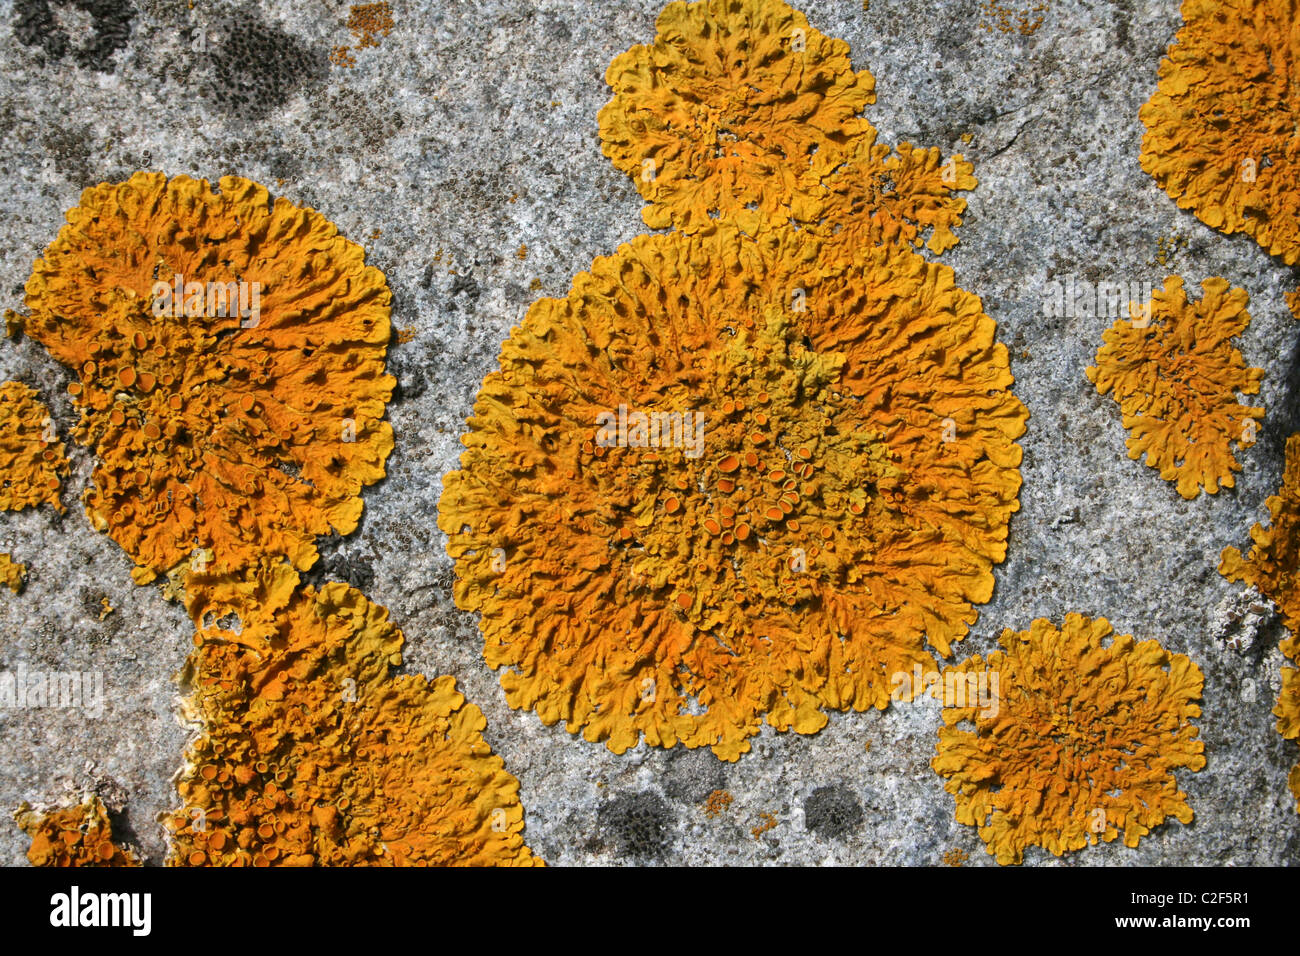 Yellow Orange Rosette Of The Maritime Lichen Caloplaca thallincola On Rocks At Conwy RSPB Reserve, Wales Stock Photo